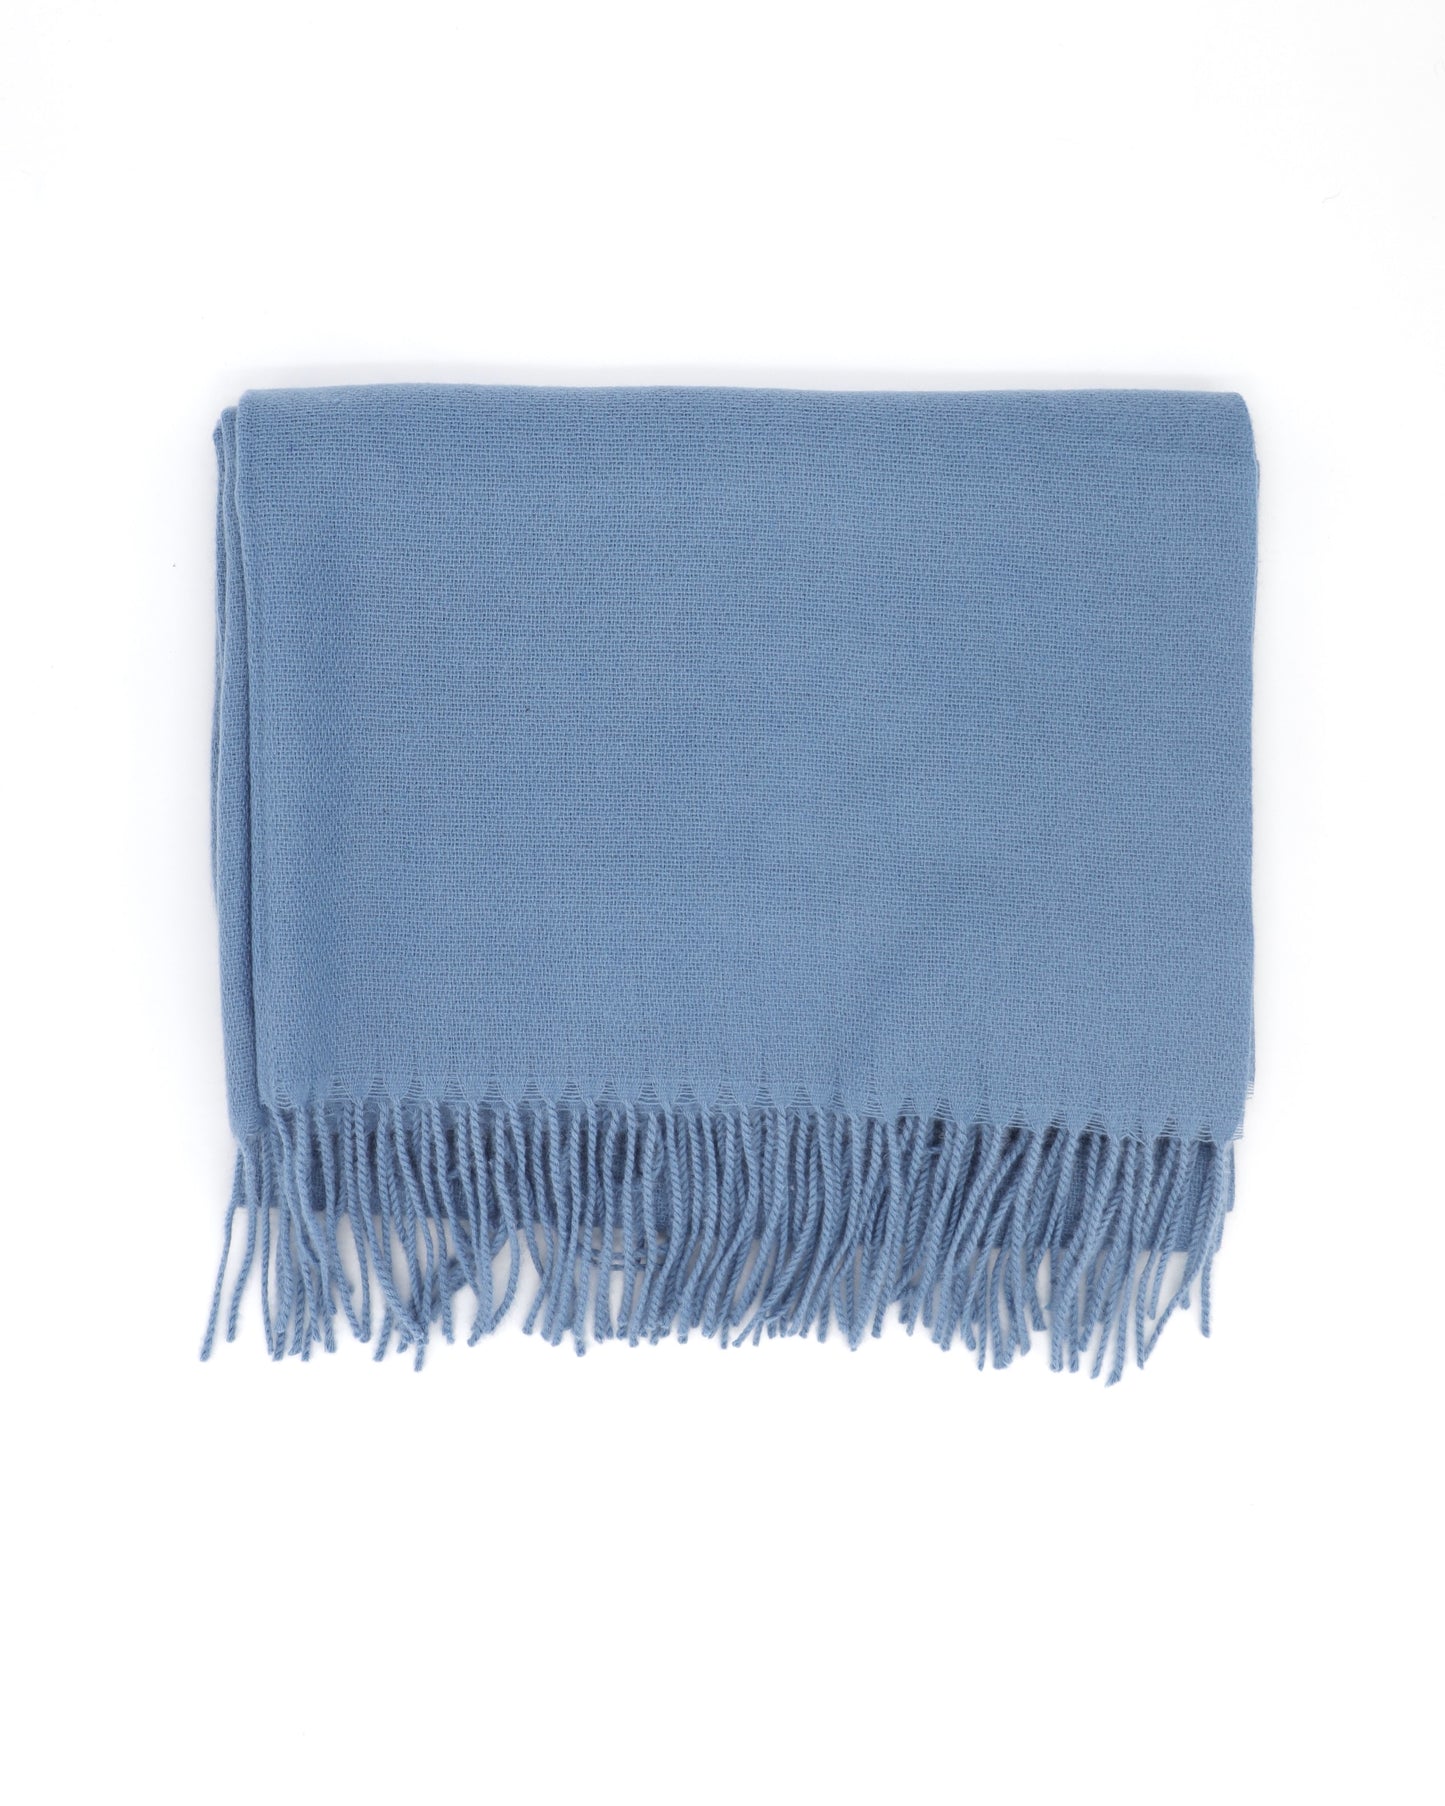 This Scarf is a finest XL-Size soft scarf from Villanelle. A luxurious accessory for women made from the softest wool and cashmere blend for extreme comfort and warmth. It is made in a trendy stone blue color for a great look and feeling. A cozy accessory for cold winter, autumn and spring days. This product is sourced and manufactured in Poland.